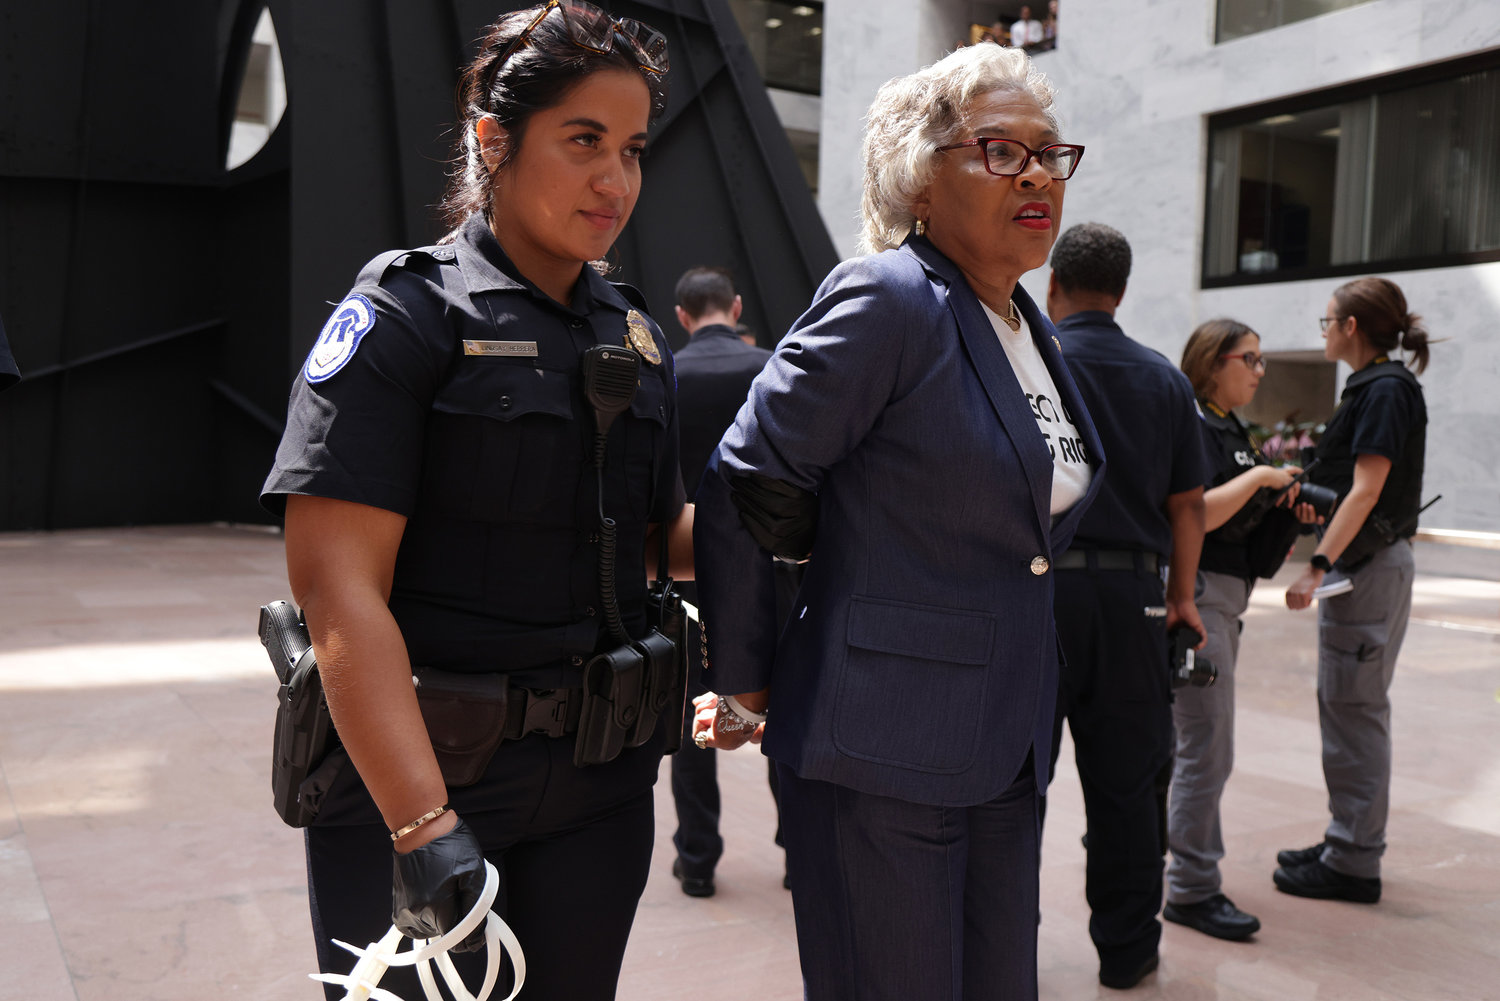 U.S. Rep. Joyce Beatty (D-Ohio), second from left, Chair of the Congressional Black Caucus (CBC), is led away by a member of the U.S. Capitol Police during a protest at the Hart Senate Office Building Thursday, July 15, 2021, on Capitol Hill in Washington, D.C.